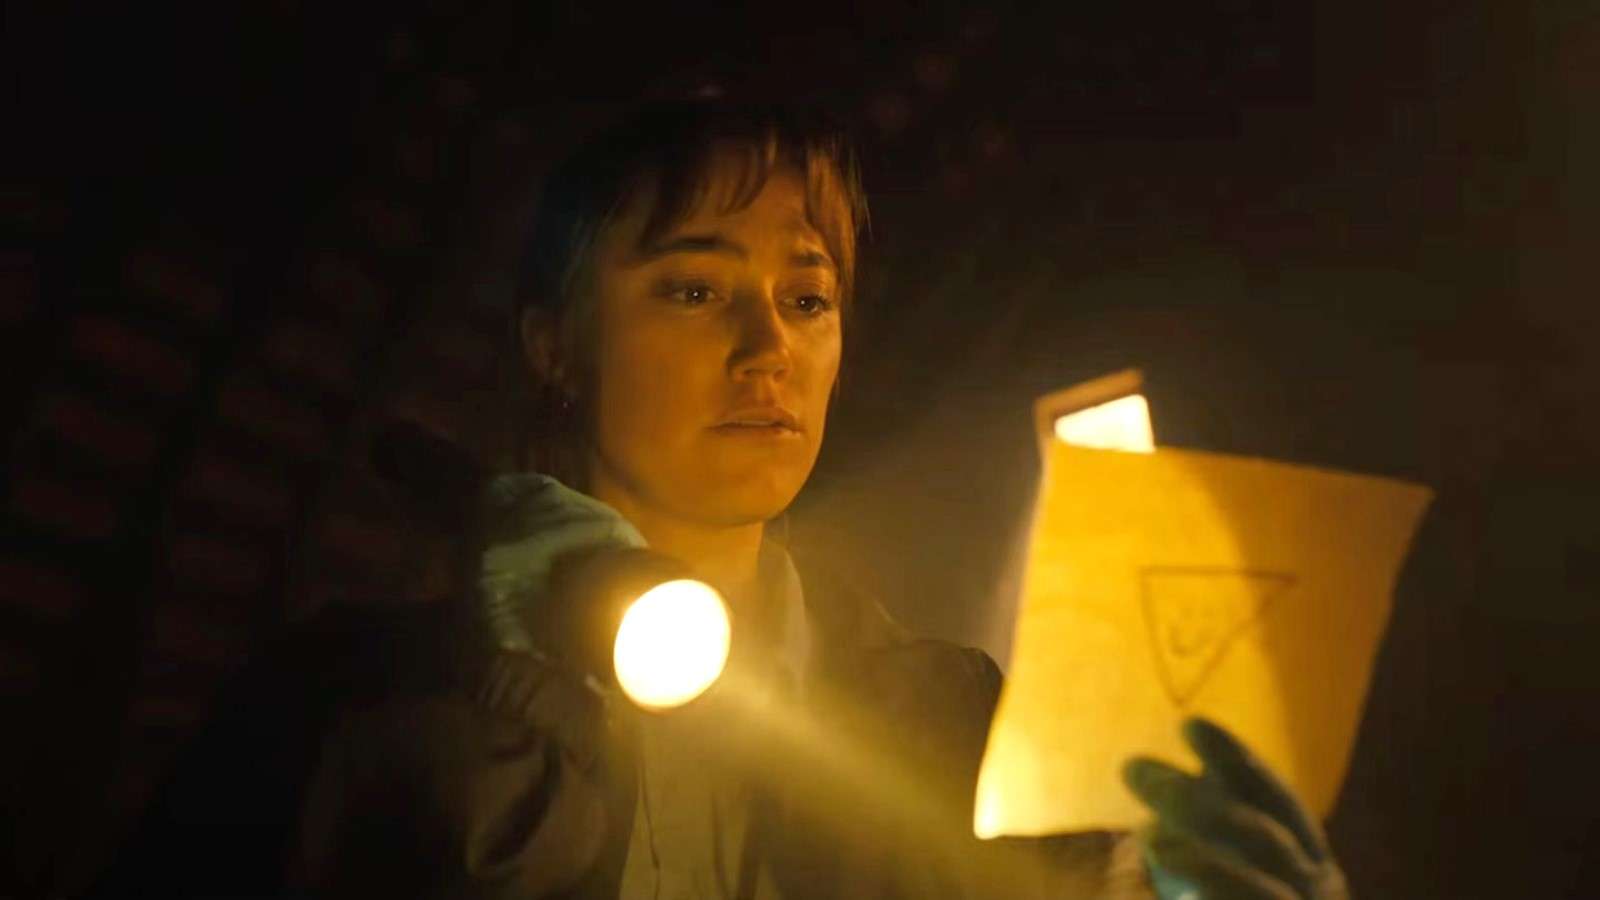 Maika Monroe (who stars alongside Nicolas Cage) as Lee Harker looking at a piece of paper in Longlegs